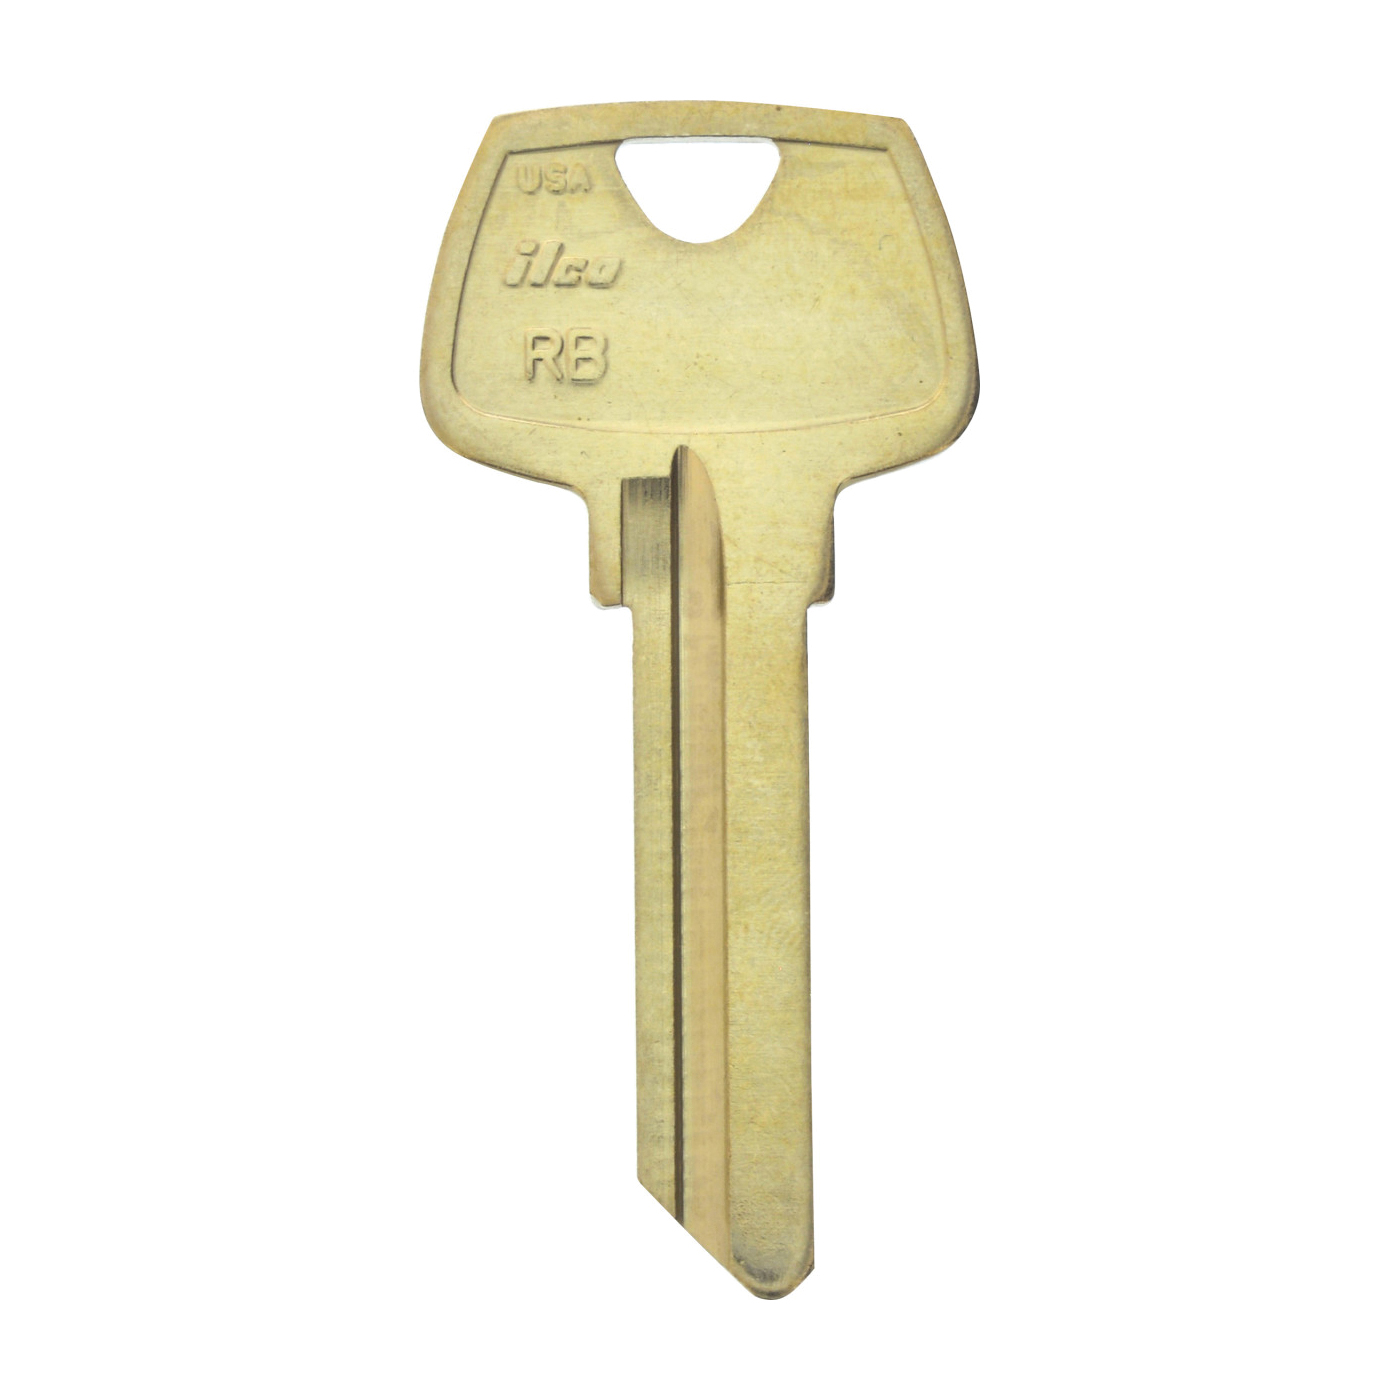 442281 Key Blank, Brass, Nickel-Plated, For: Sargent Locks